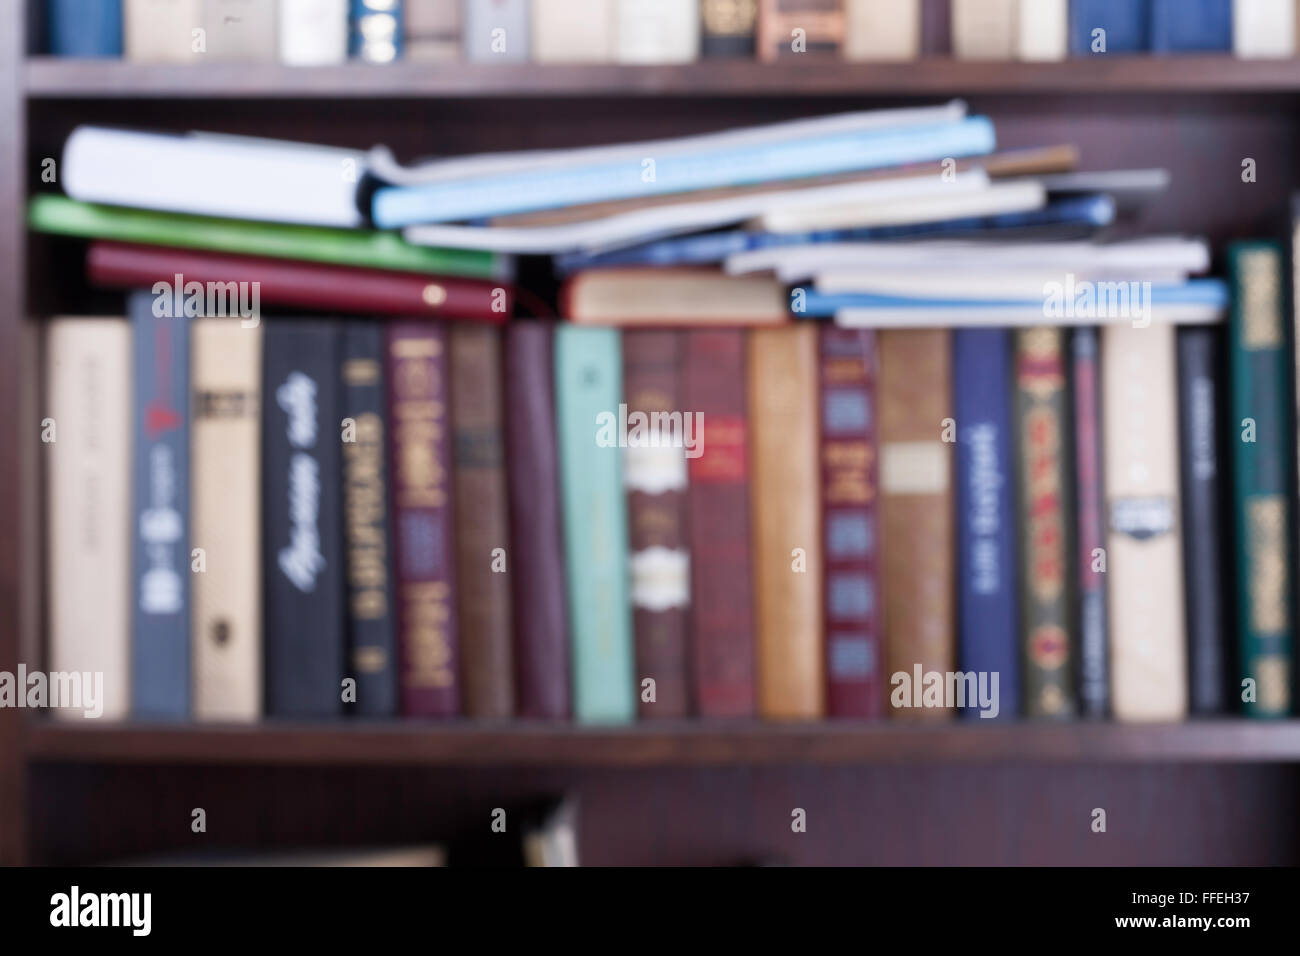 specially blured picture of book shelves Stock Photo